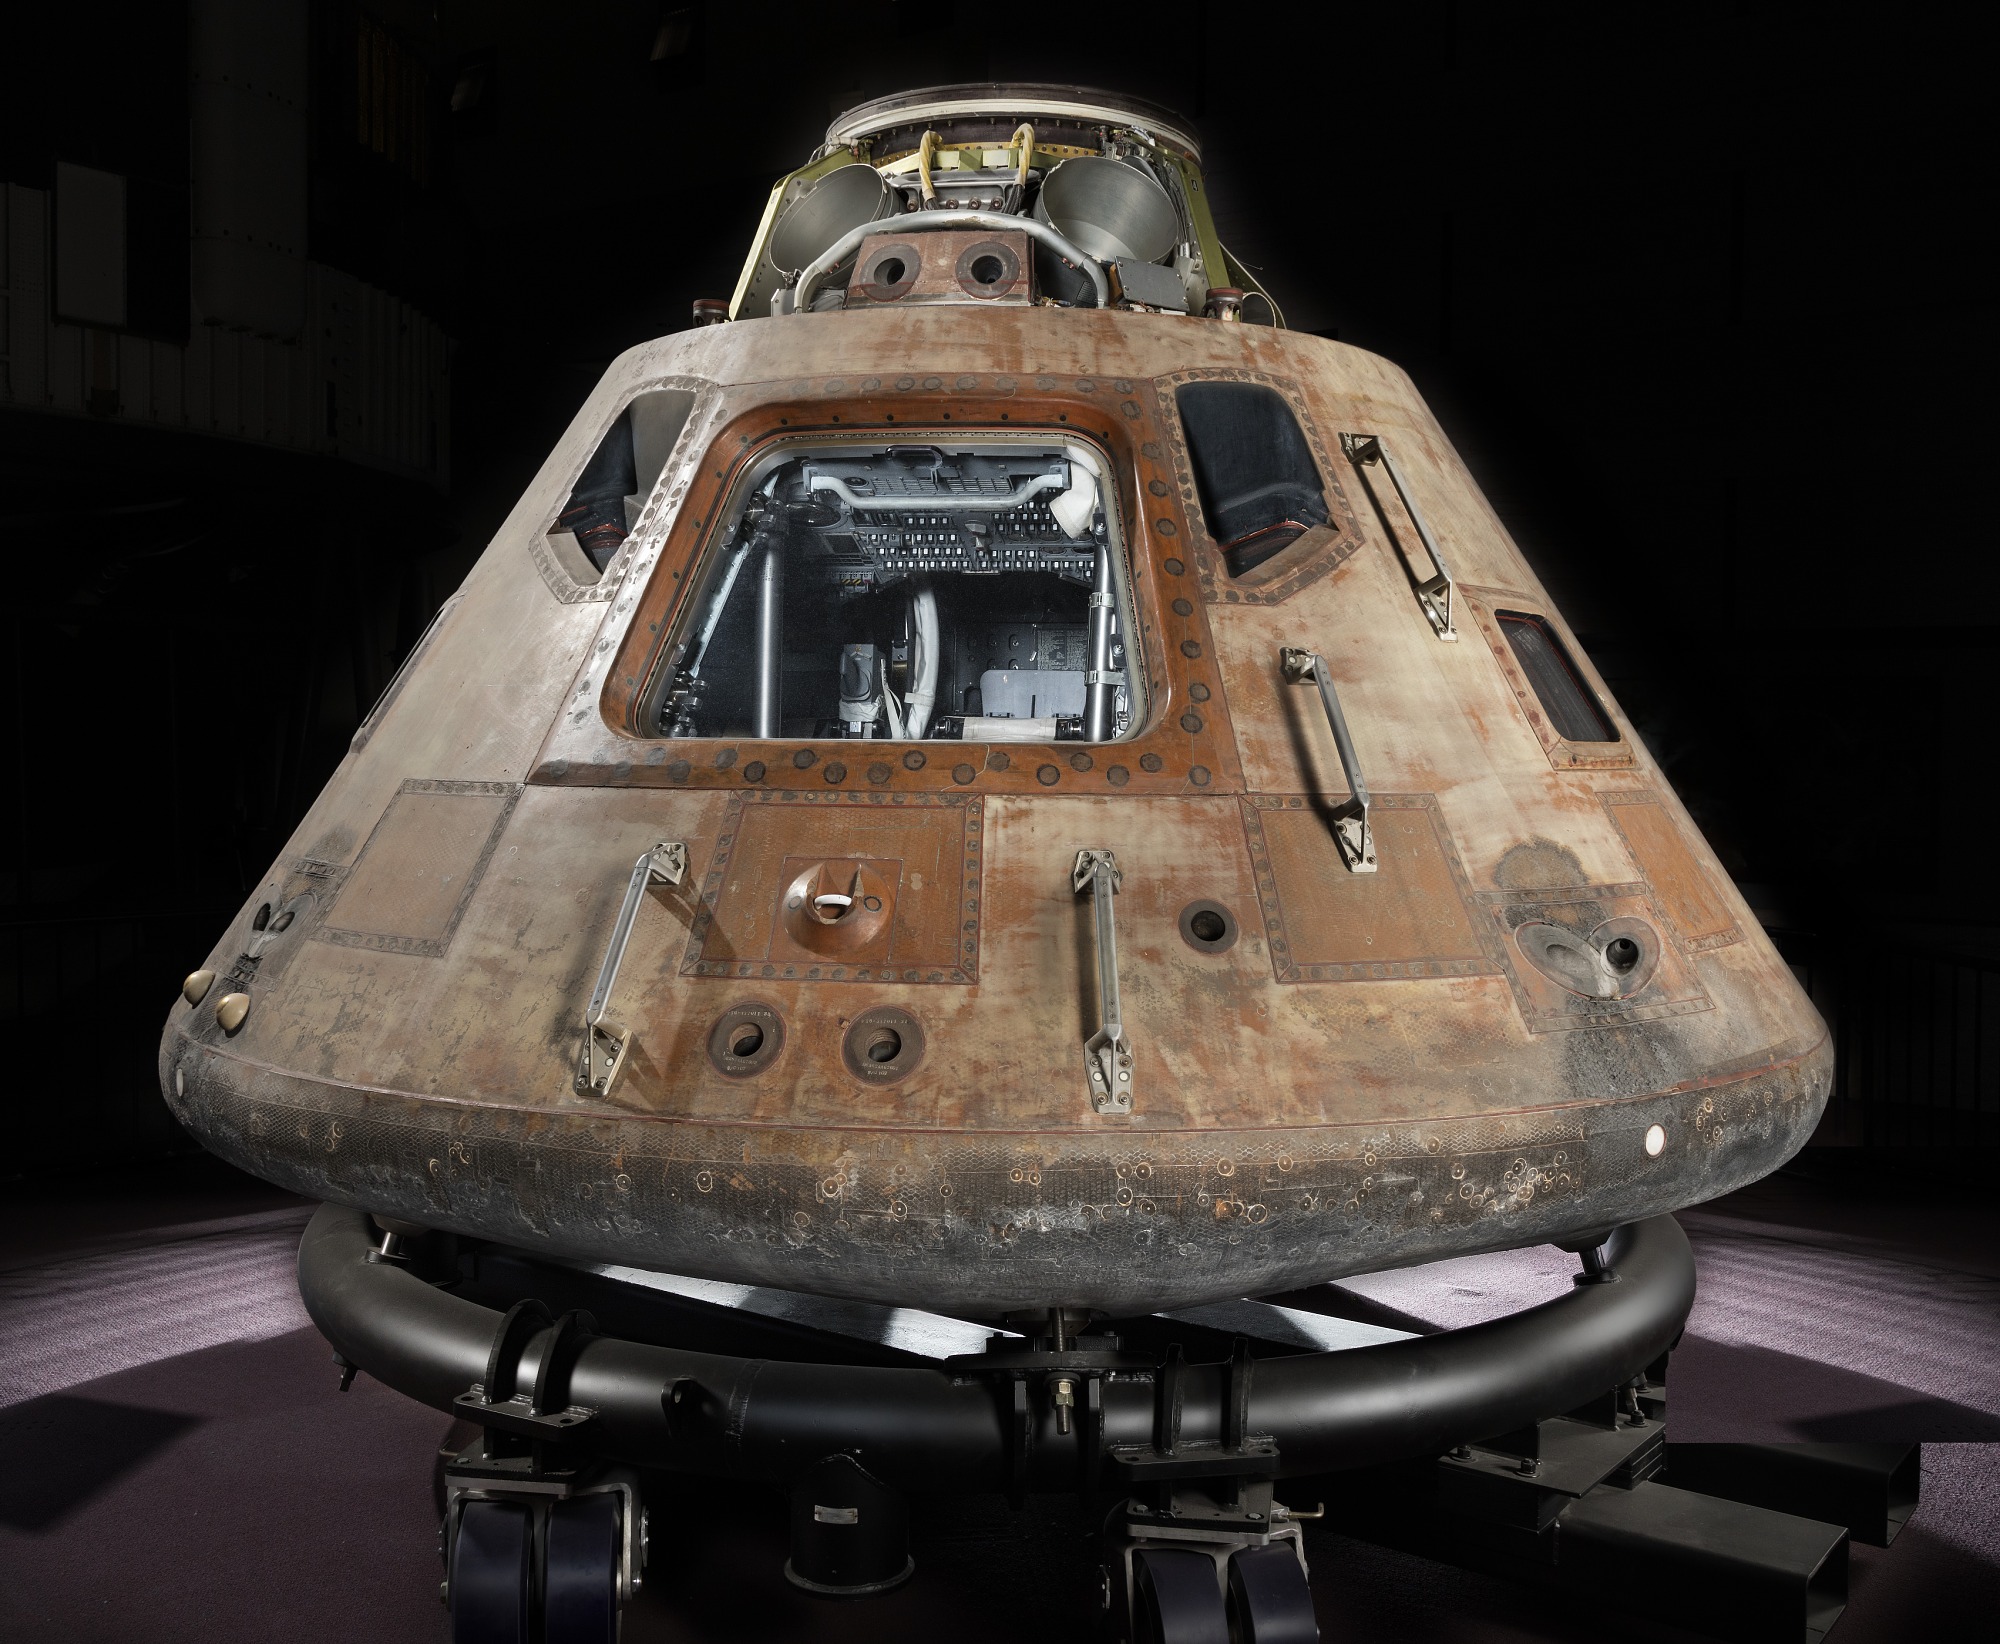 Conical-shaped spacecraft, photographed in a studio, constructed from numerous metal panels riveted together, now a rusted brown colour. Closest to the viewer is a rectangular hatch, with several small ‘side’ windows.